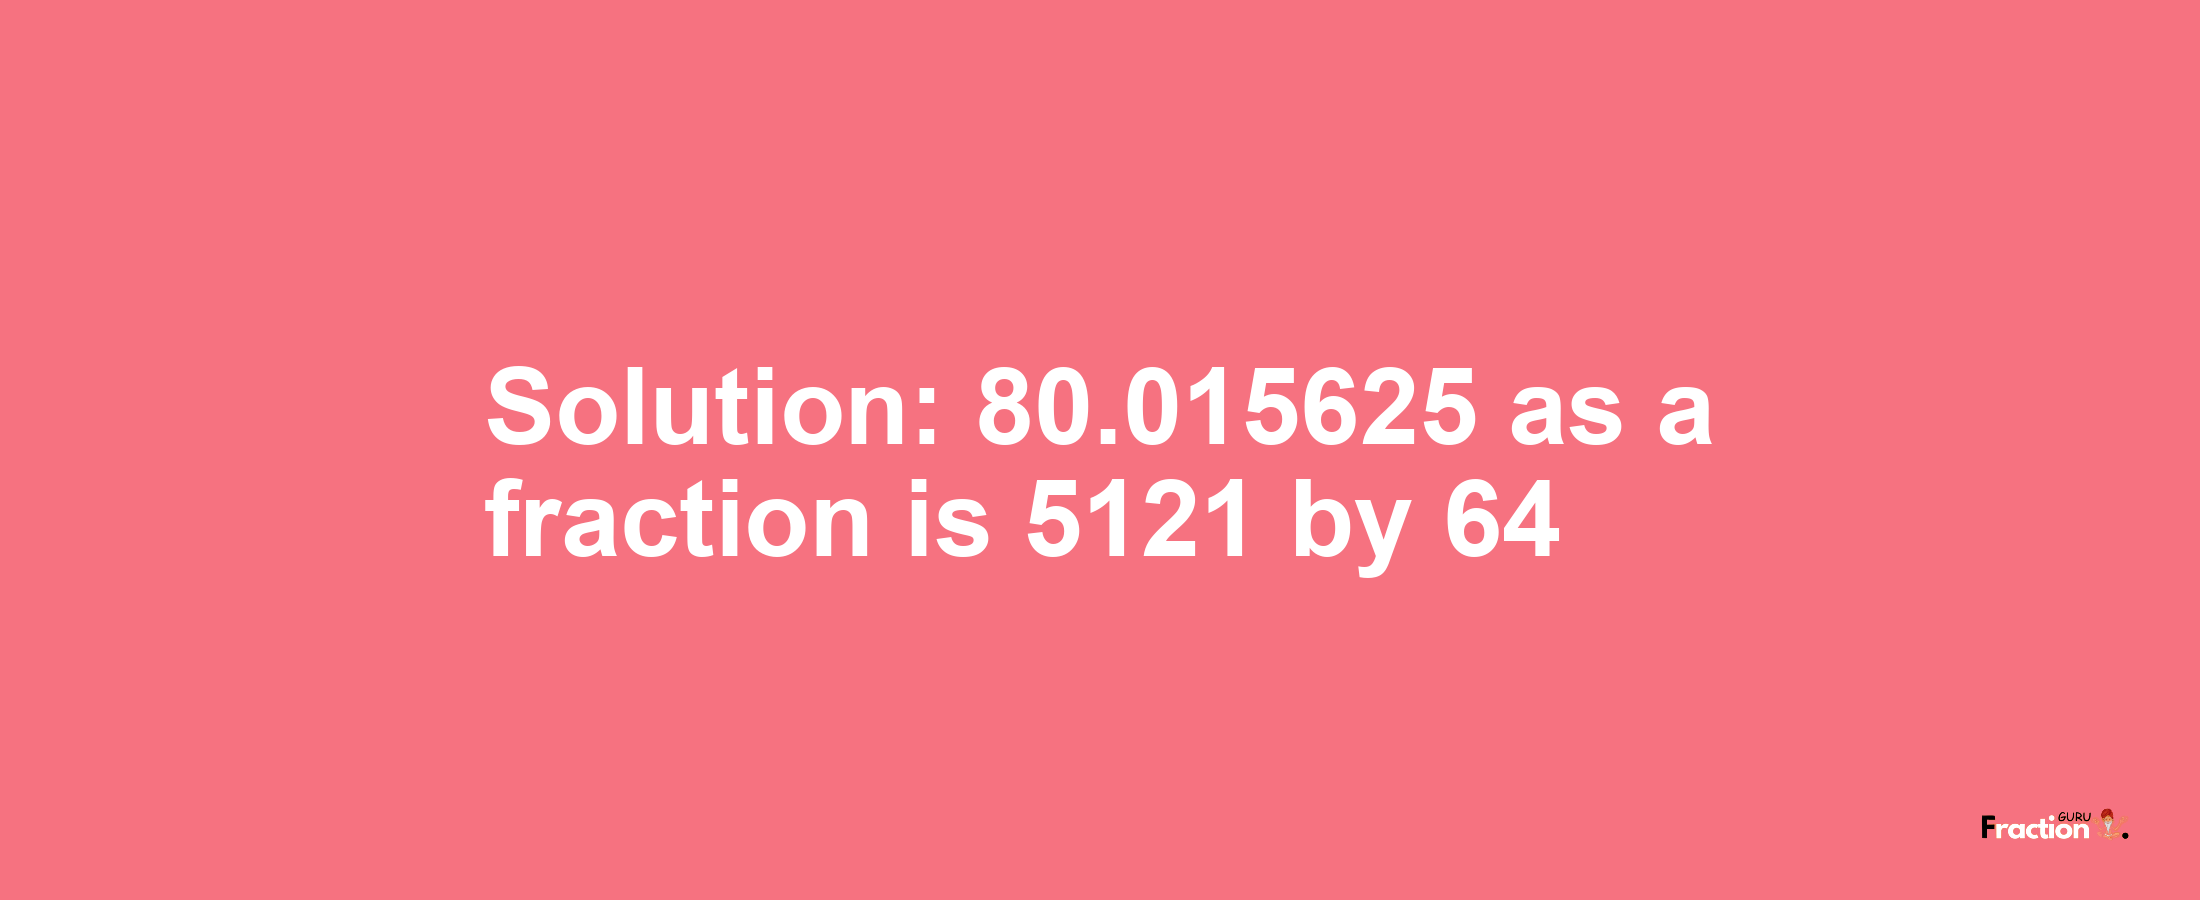 Solution:80.015625 as a fraction is 5121/64